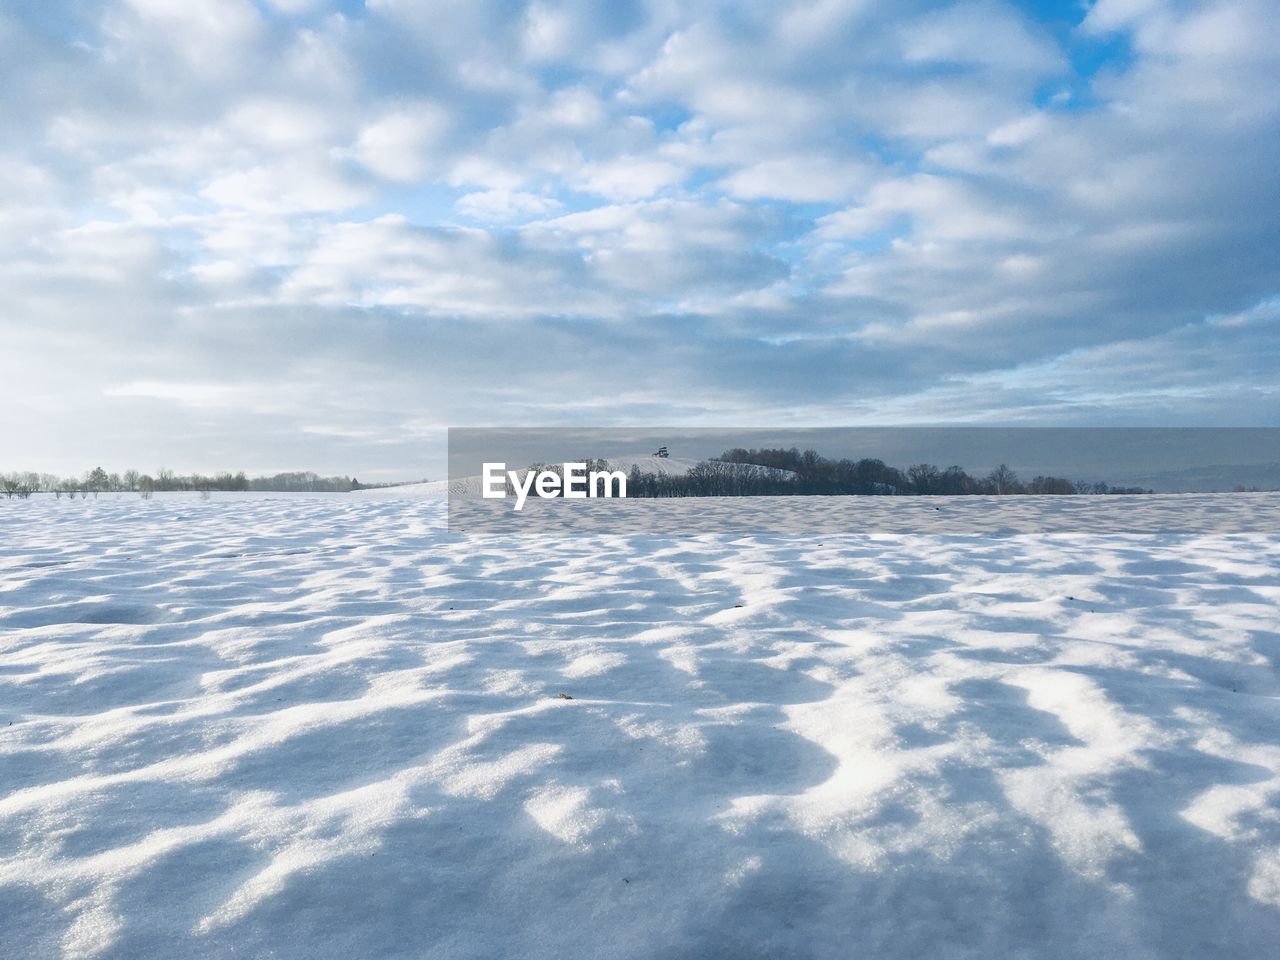 SNOW ON LAND AGAINST SKY DURING WINTER